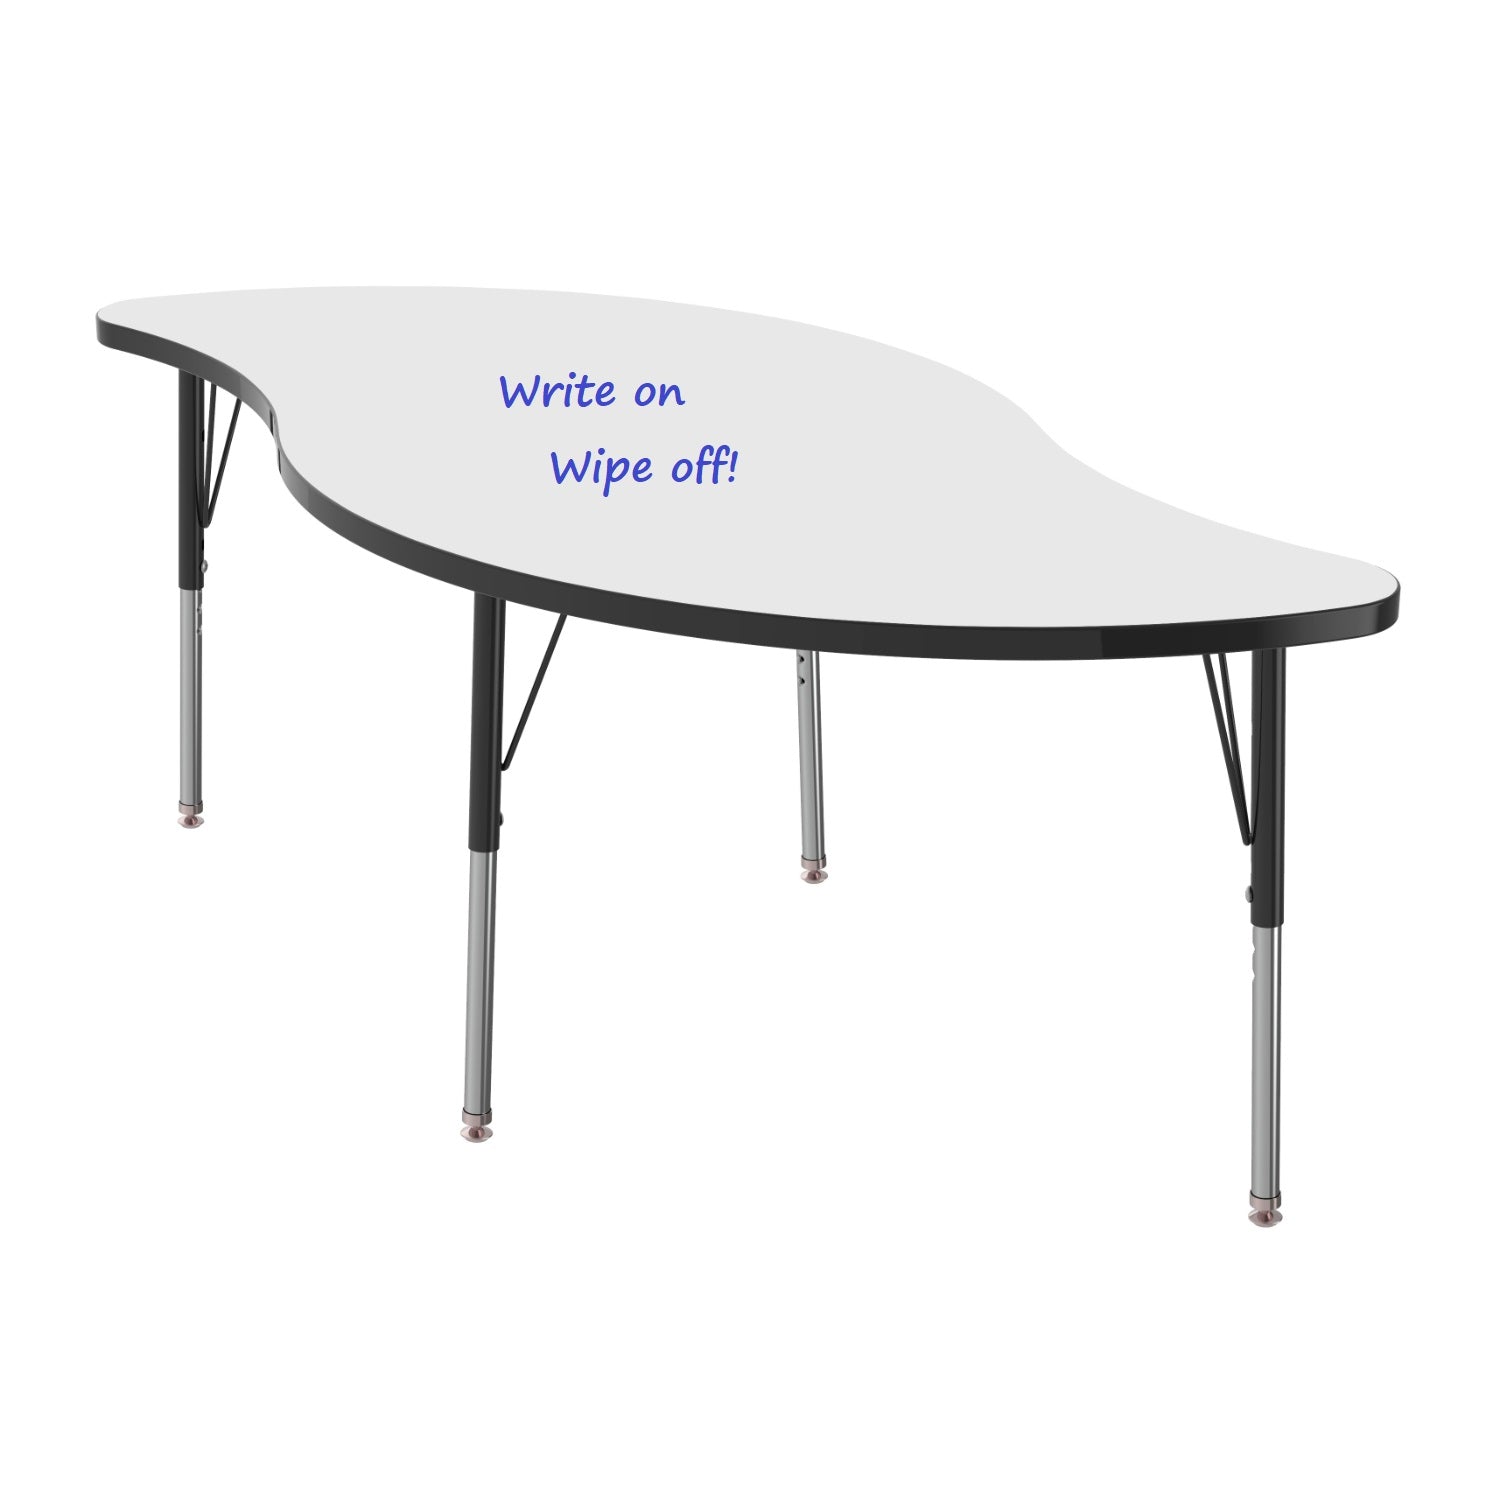 MG Series Adjustable Height Activity Table with White Dry Erase Markerboard Top, 30" x 60" Veer